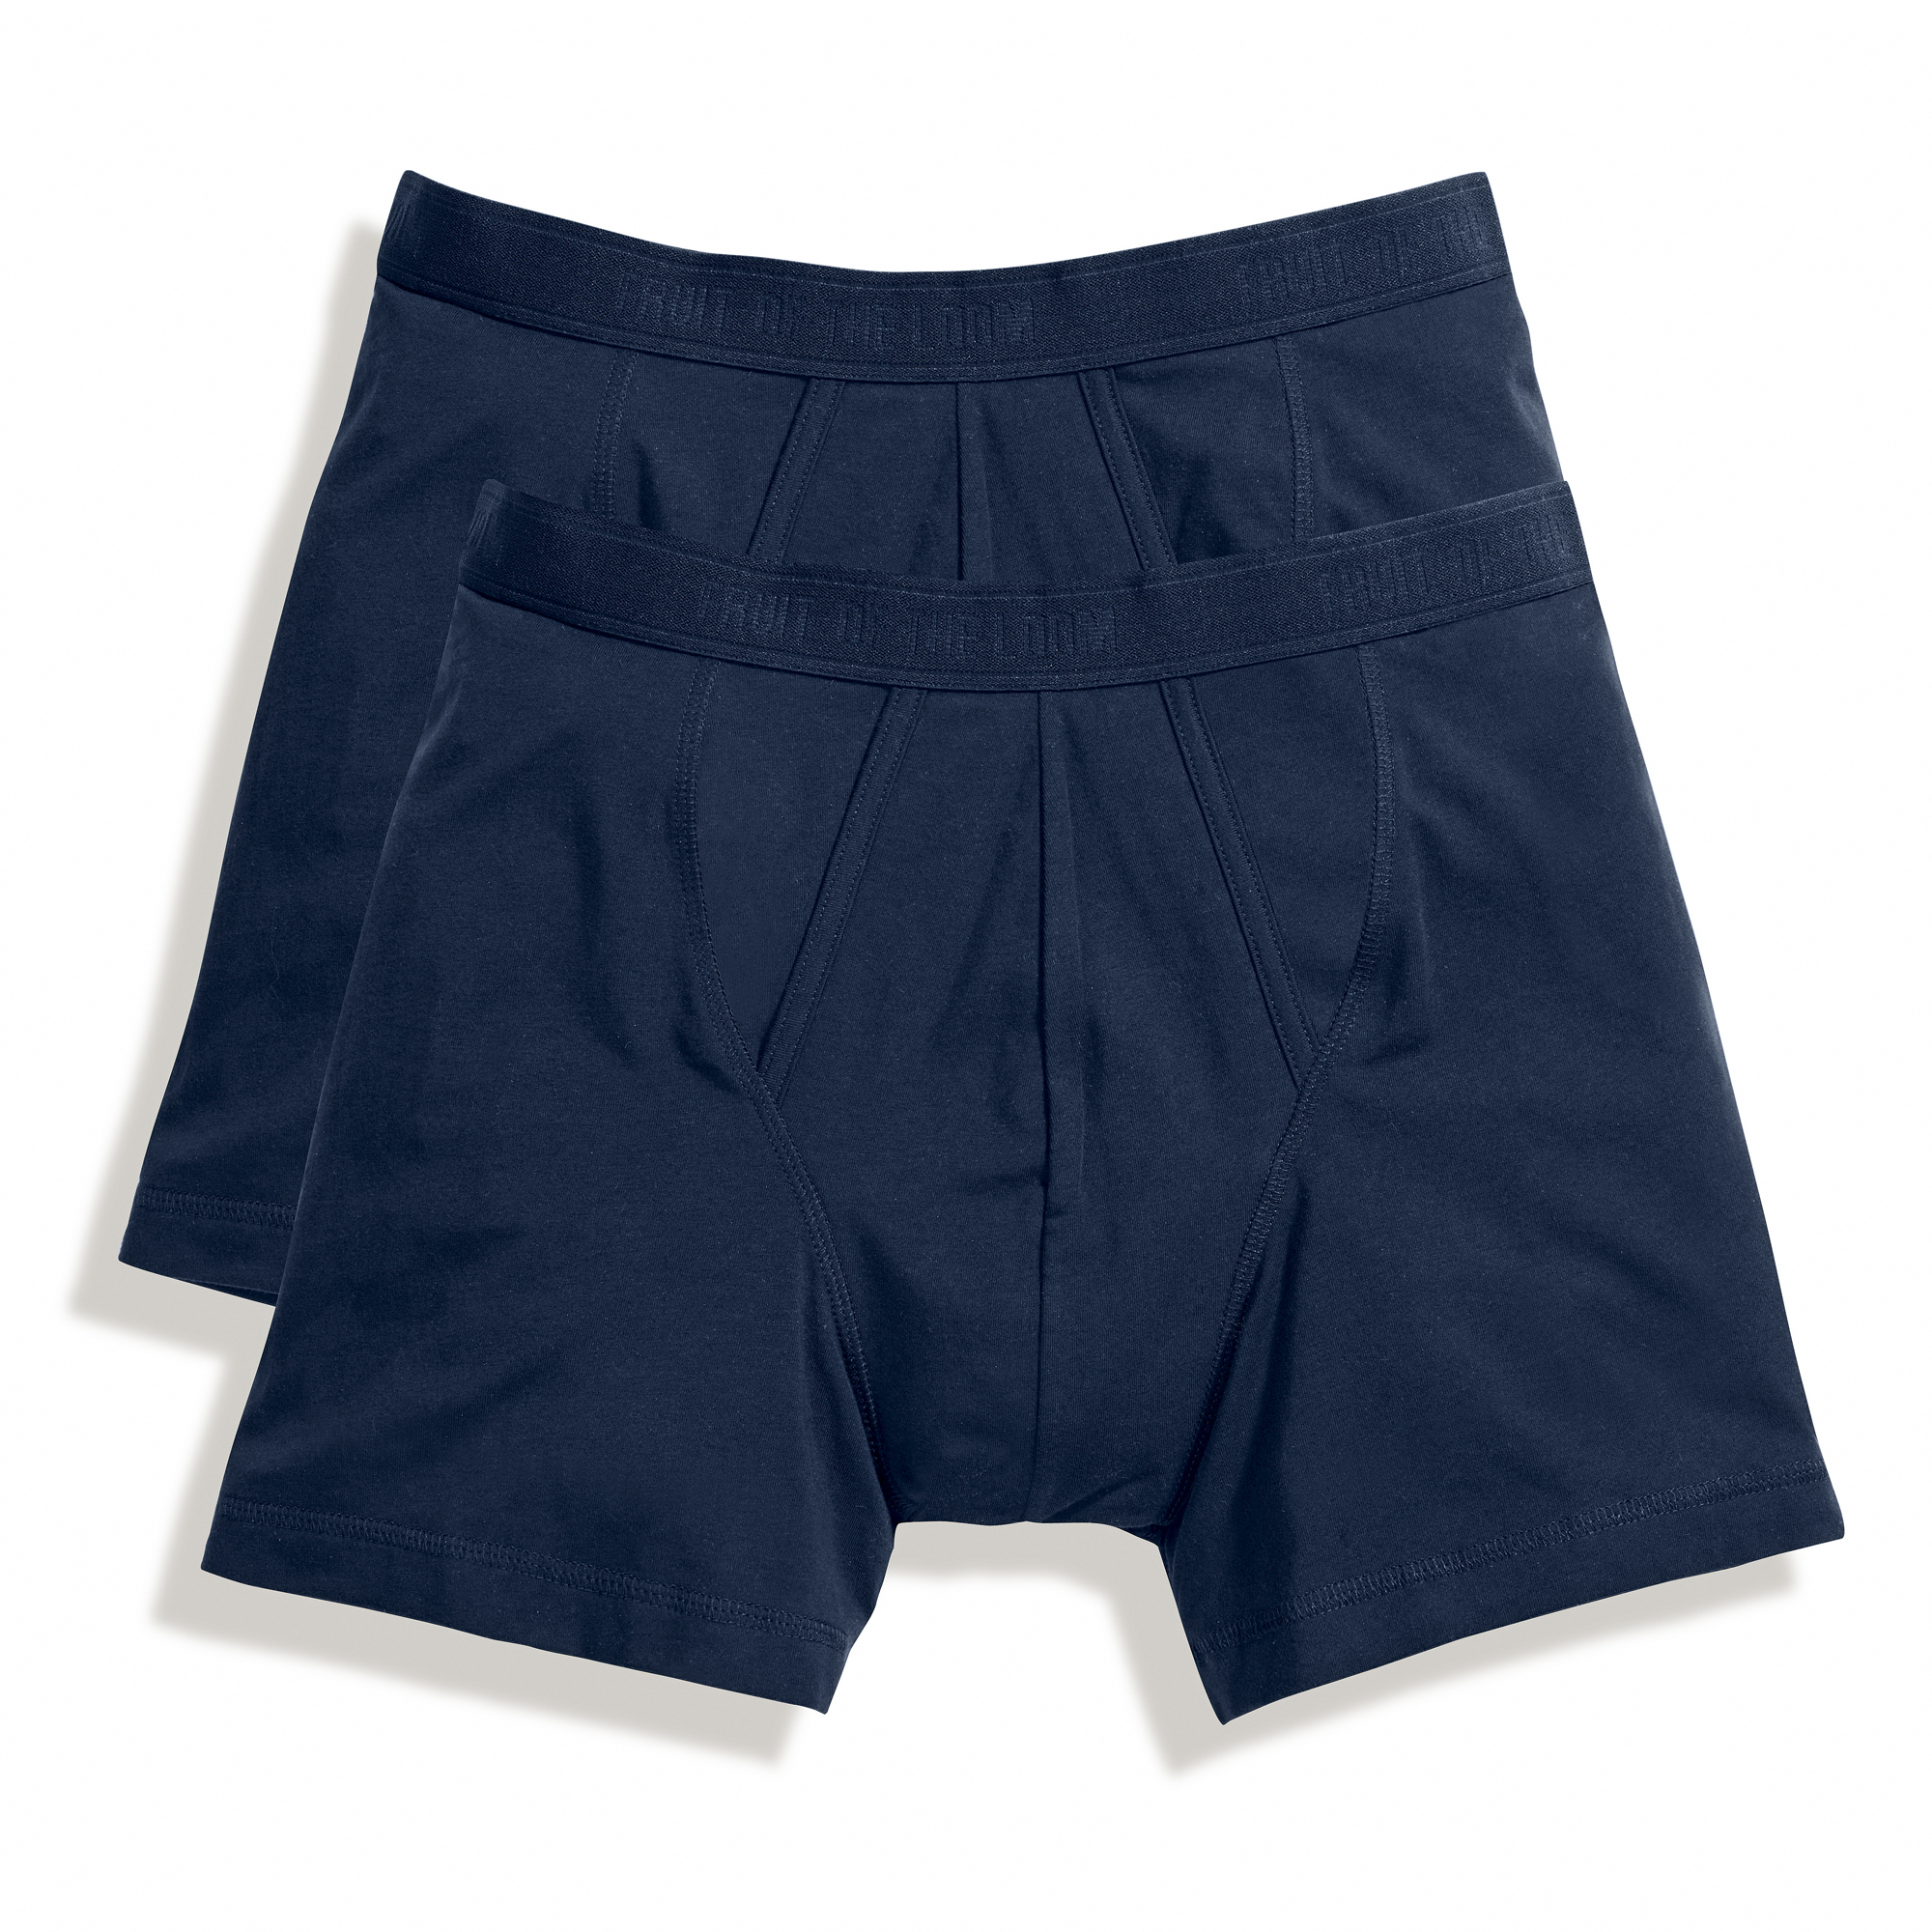 Calzoncillos Boxer Modelo Classic (pack De 2). Fruit Of The Loom  MKP